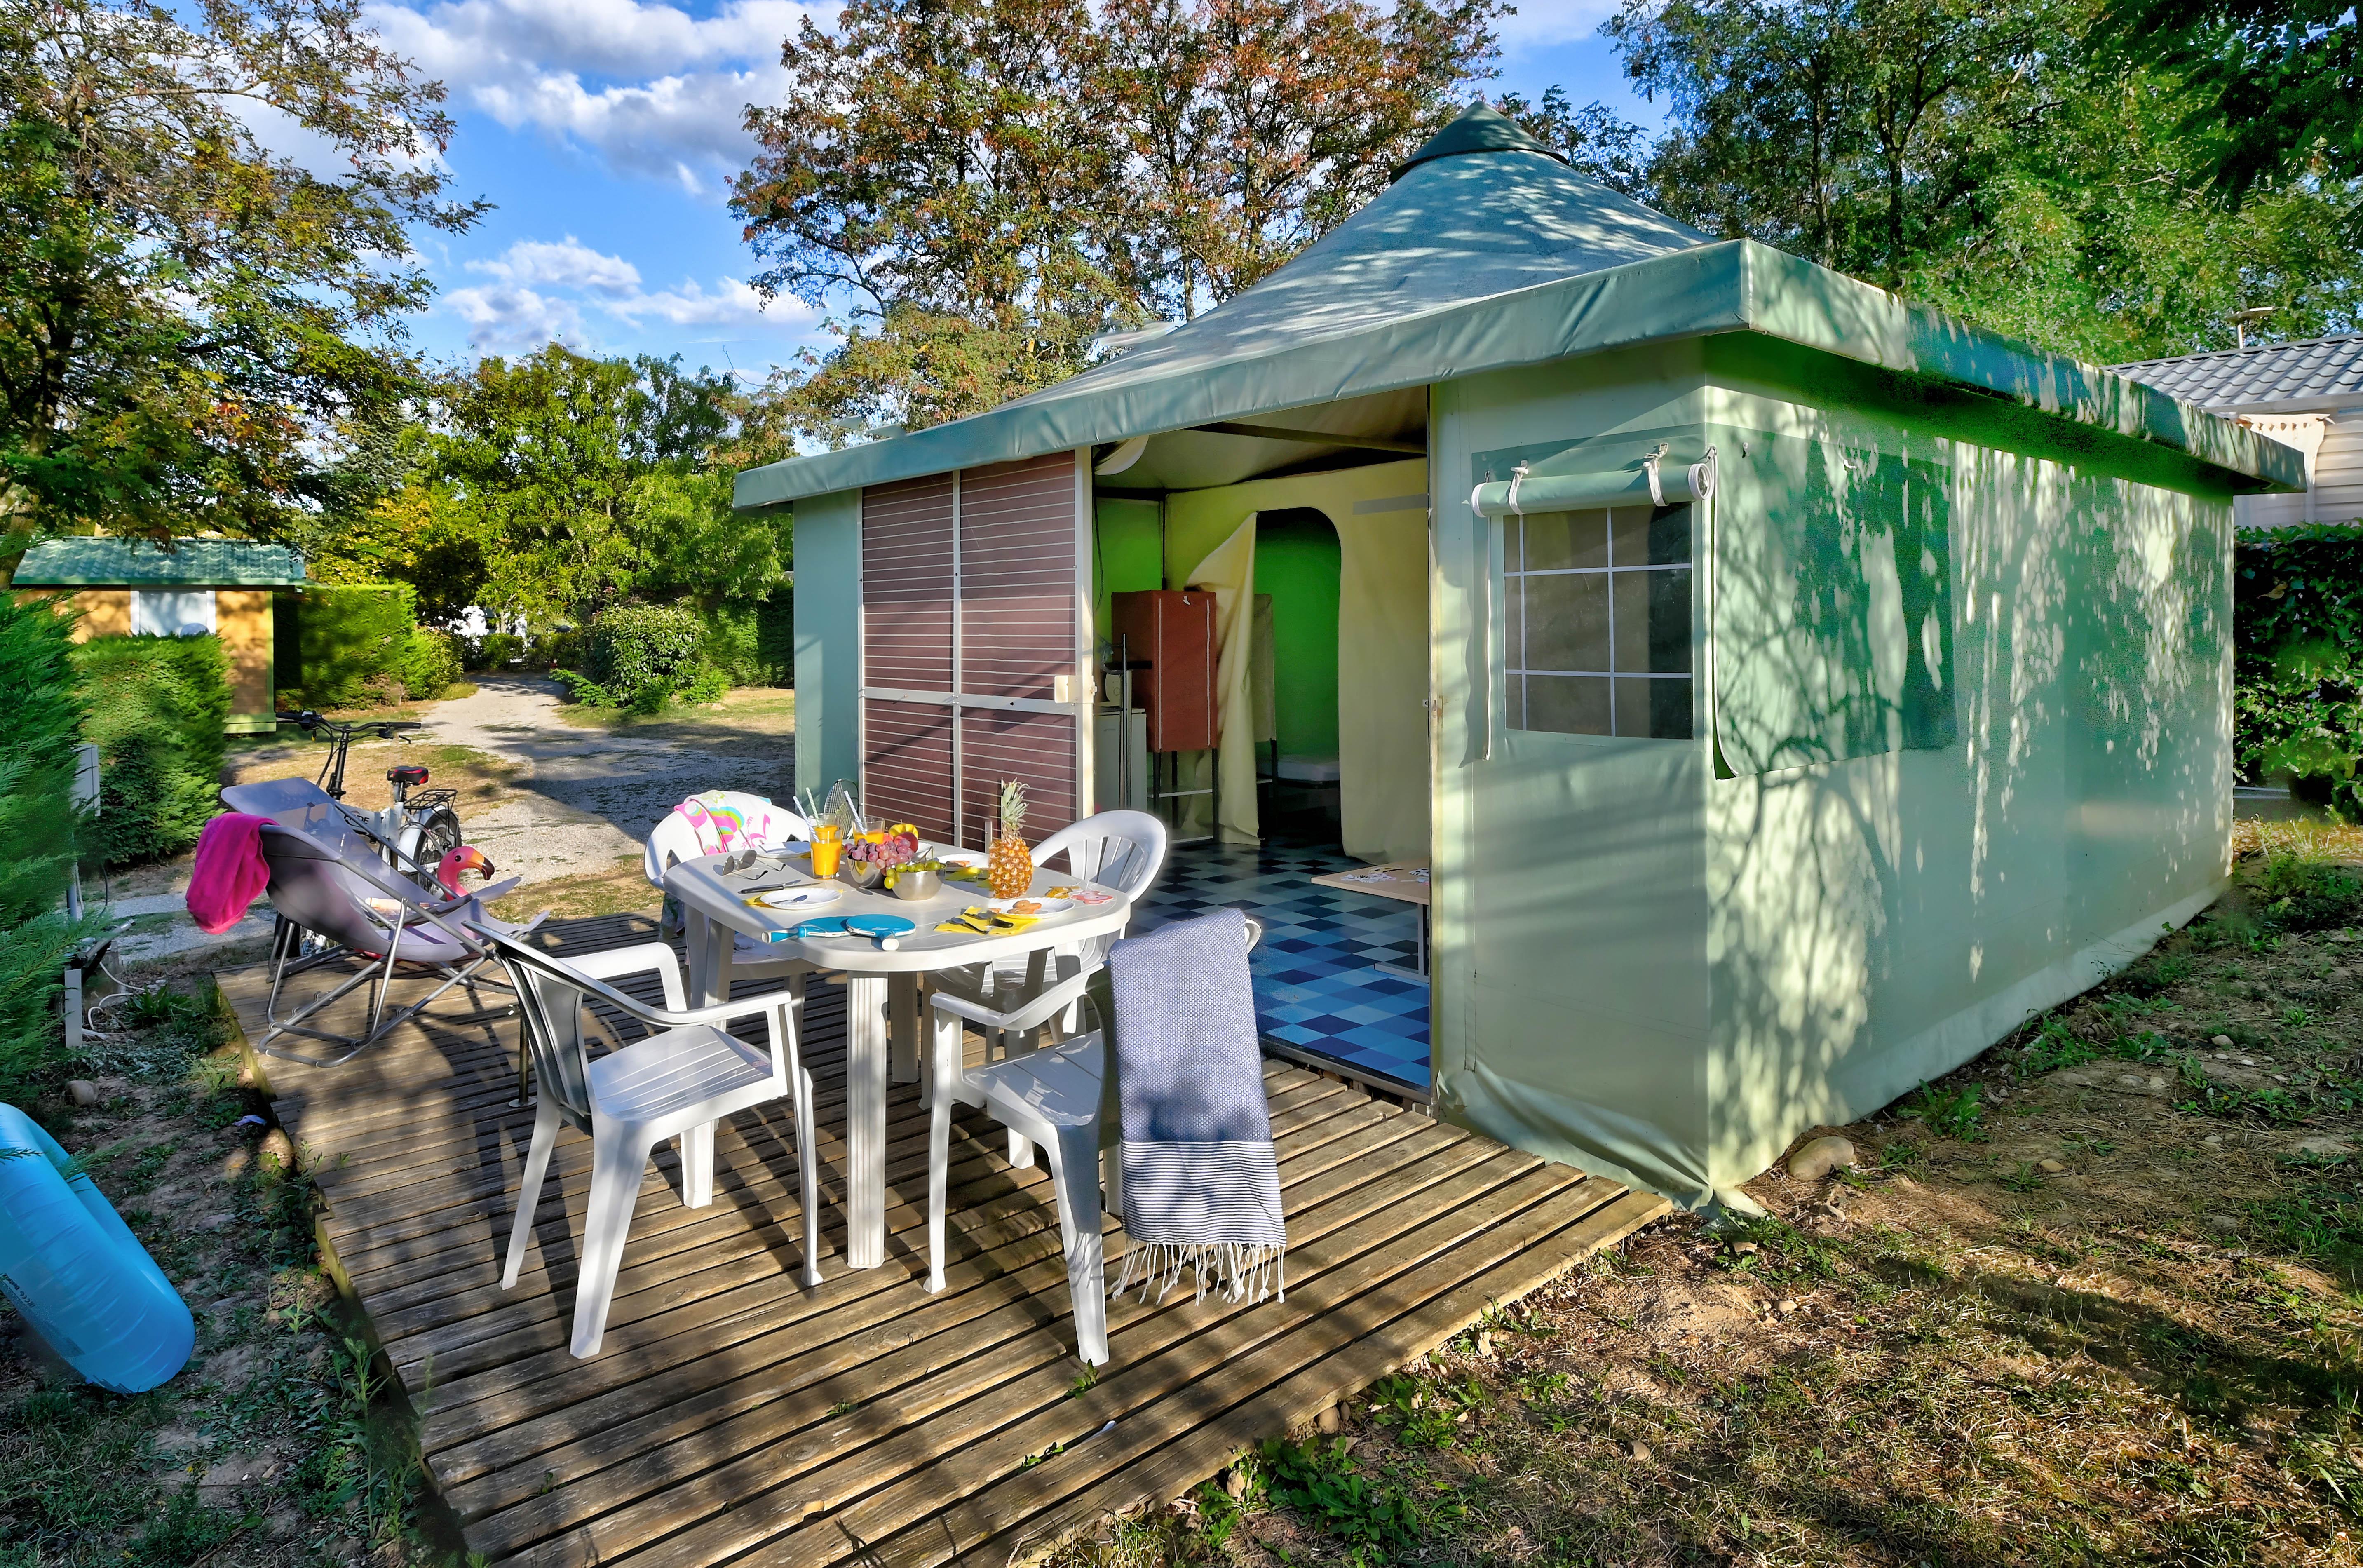 Accommodation - Funflower Bungalow Standard 25M²  (2 Bedrooms) - Without Toilet Blocks - Flower Camping La Chataigneraie